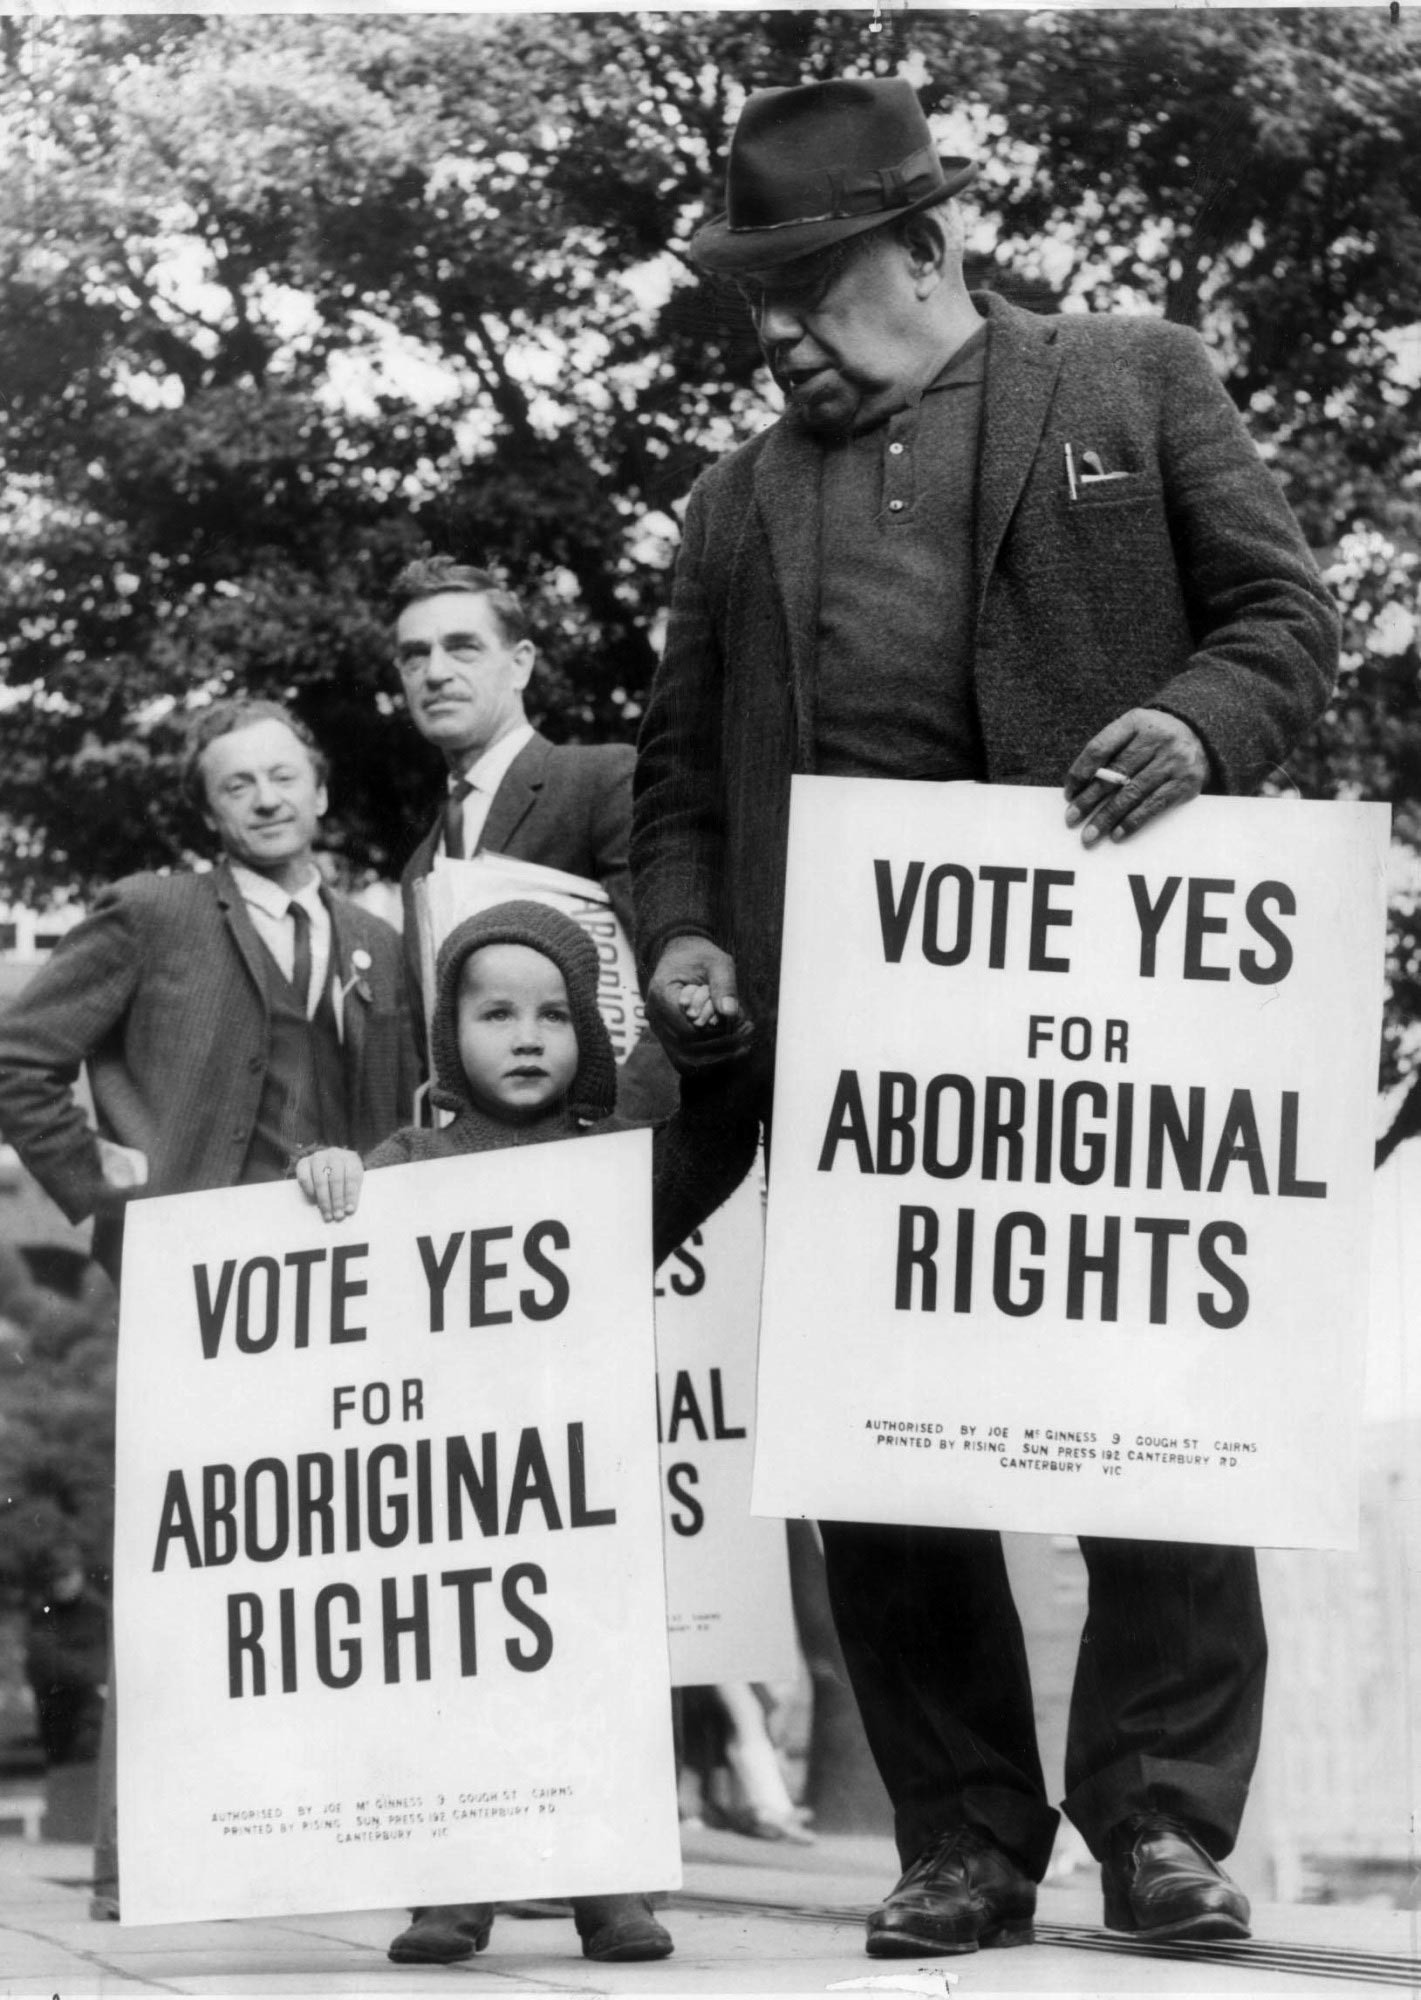 Bill Onus, President of the Victorian Aborigines' Advancement League at a march for Aboriginal rights, May 1967.